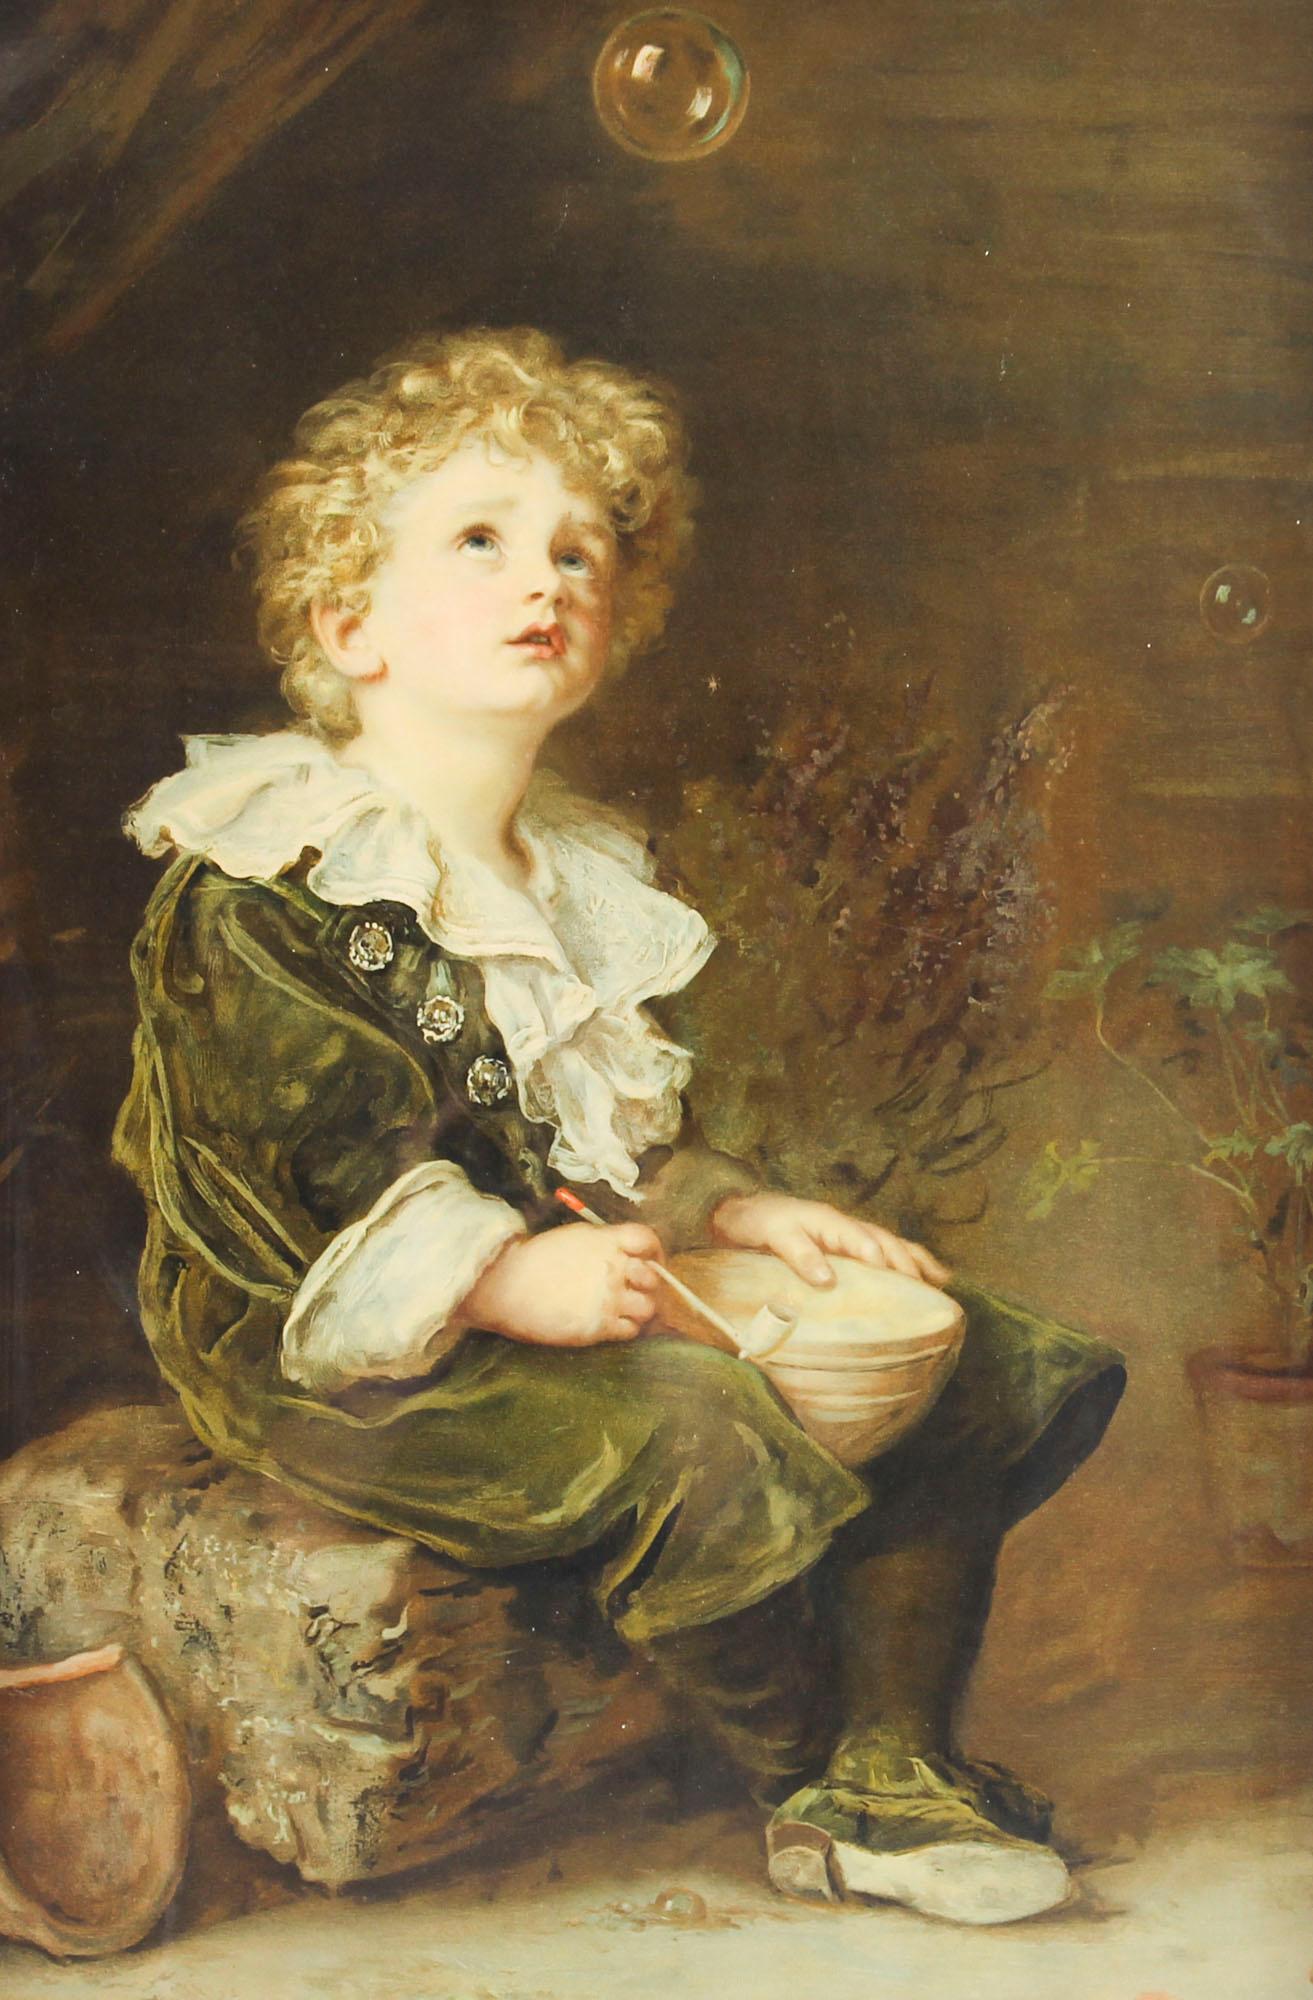 This beautiful antique print dates from 1897, is entitled 'Bubbles' and is housed in its original stunning giltwood frame.

The original was painted by John Everett Millais, and was given away with the 1897 Pears annual.

'Bubbles' was painted